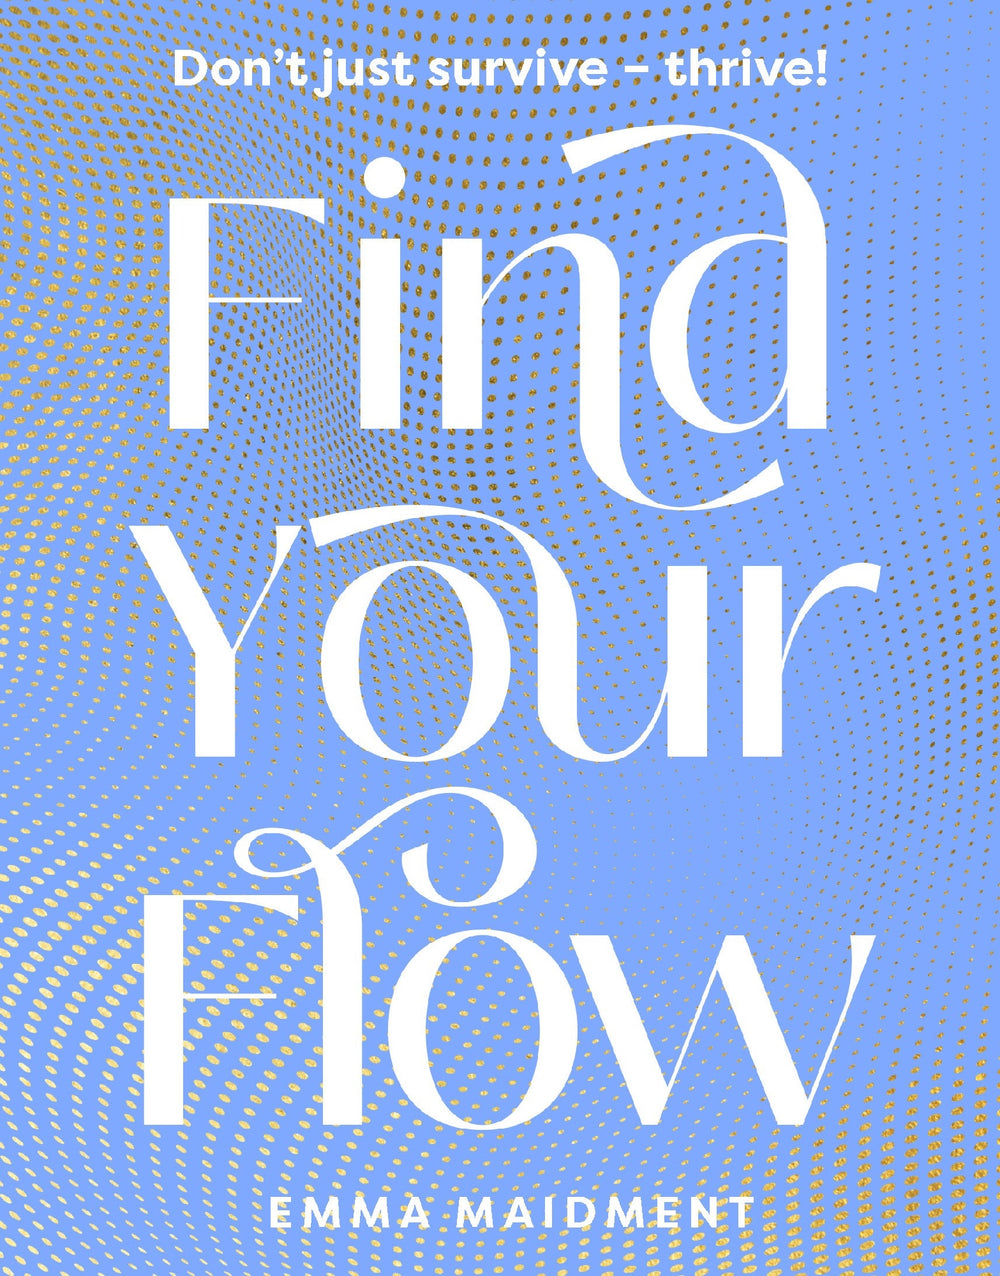 Find Your Flow